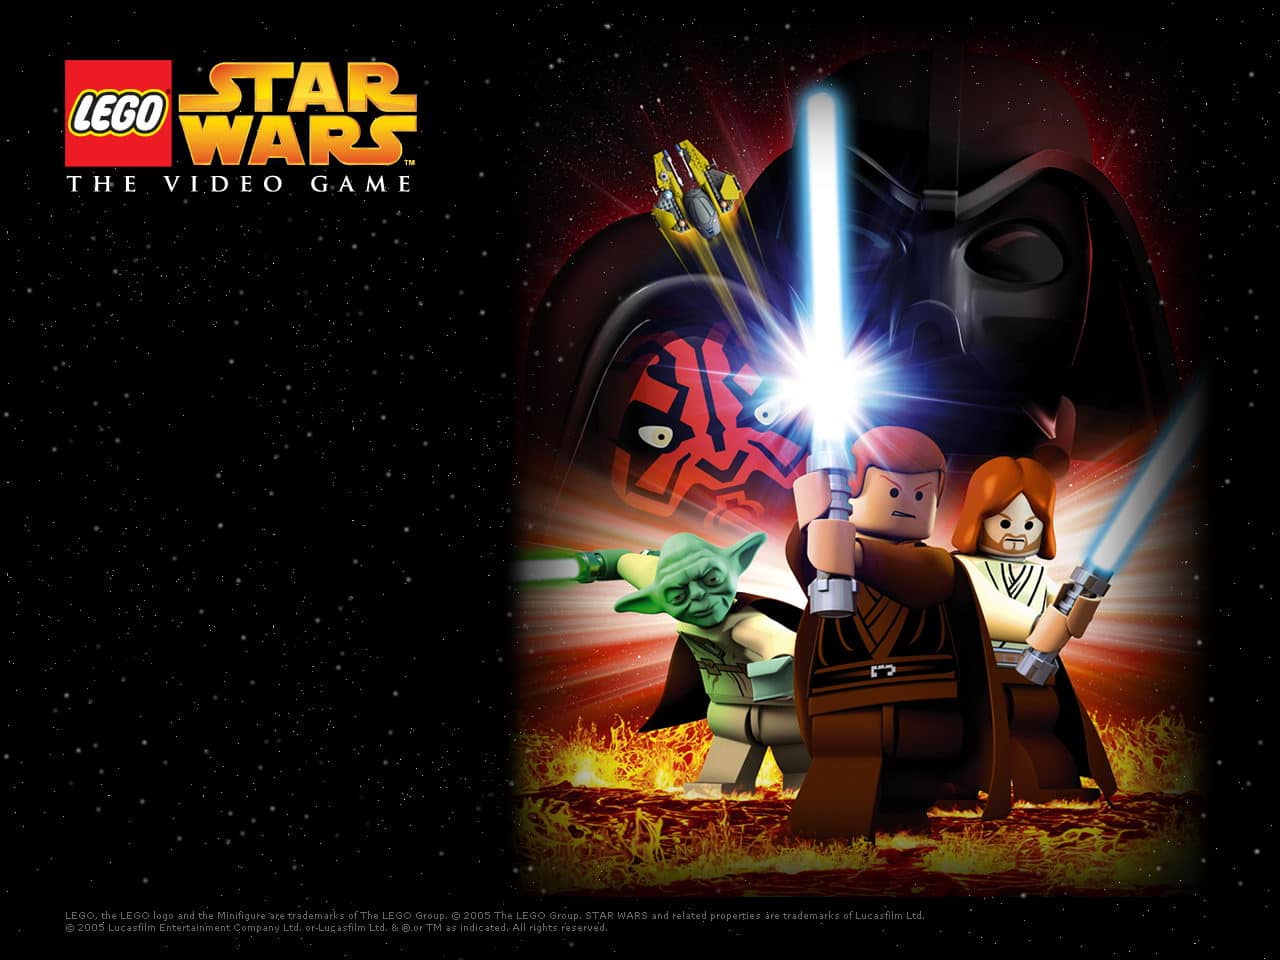 Lego Star Wars cheat for characters and other unlockables - Video Games Blogger